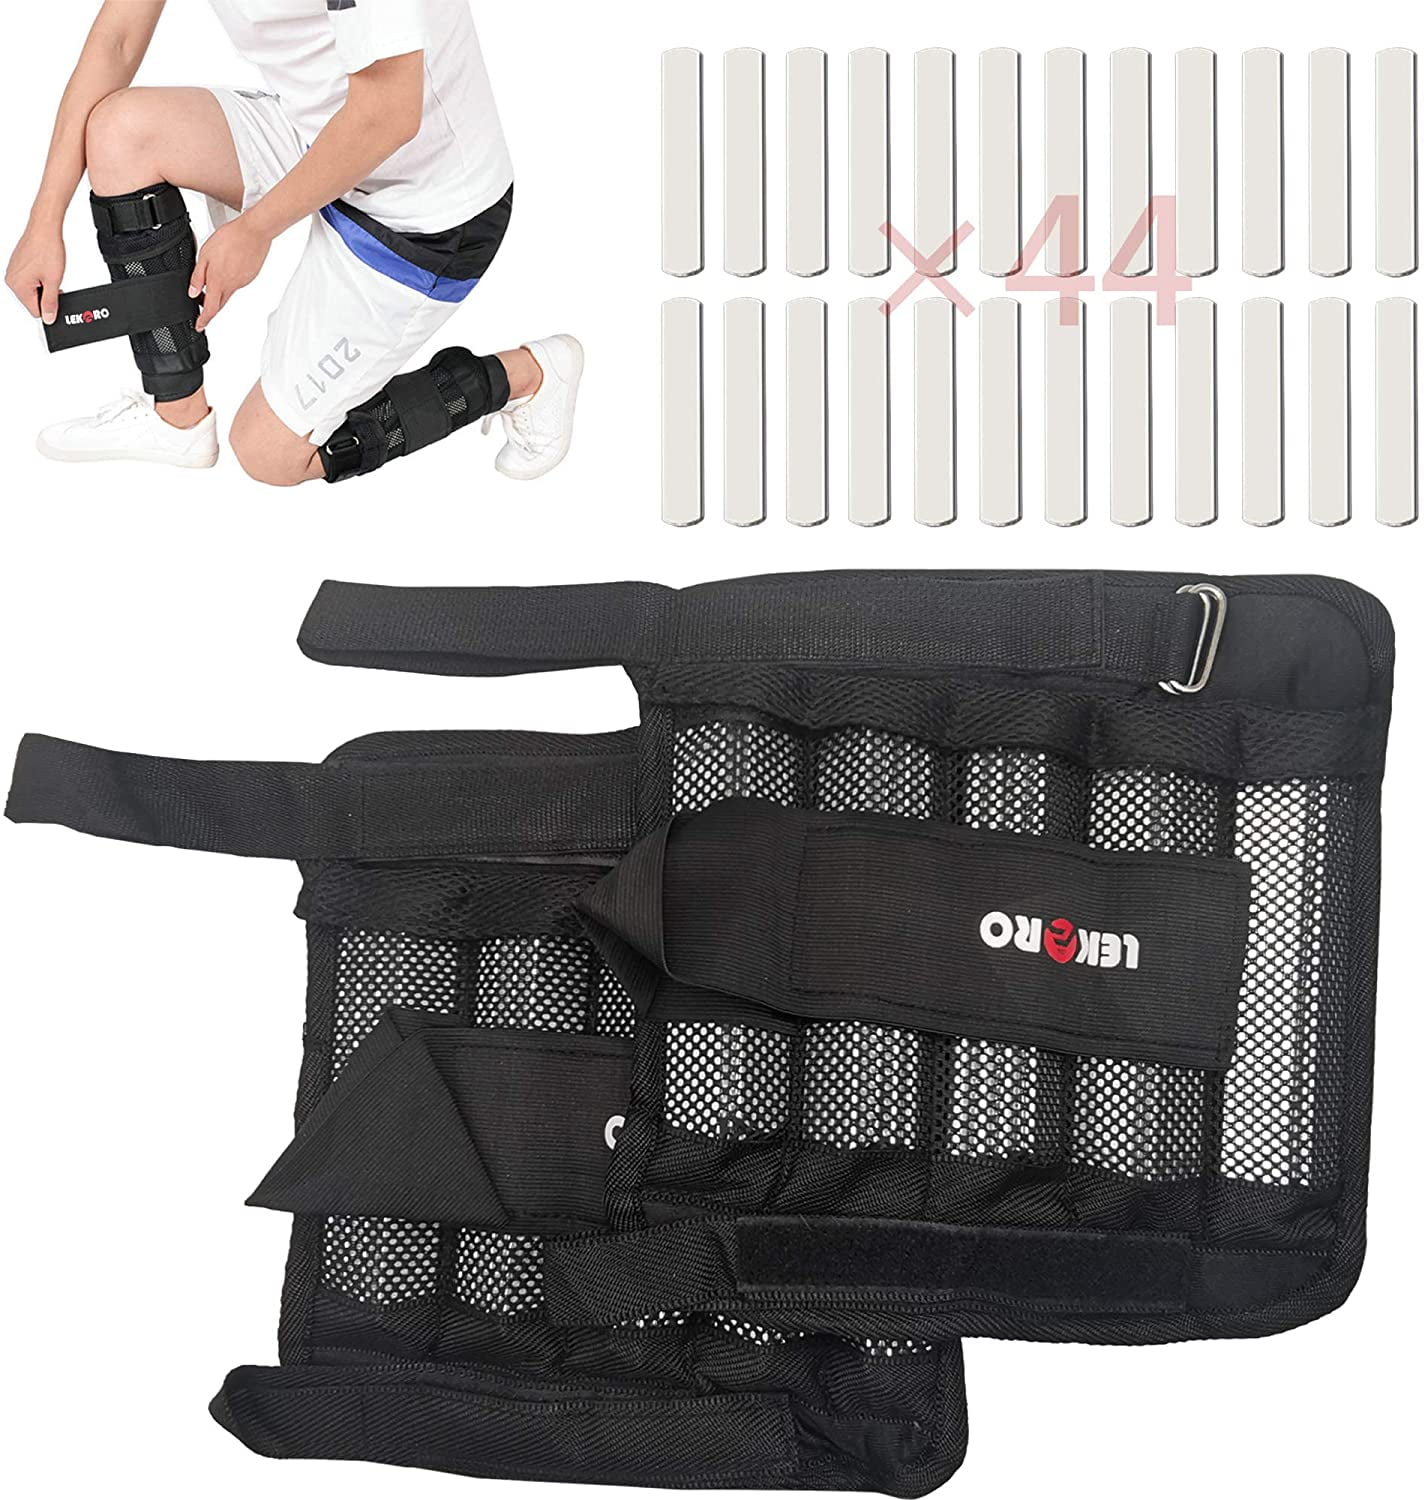 Wrist Arm Leg Weight for Fitness QF Ankle Weights Set with Large Adhesive Strap 